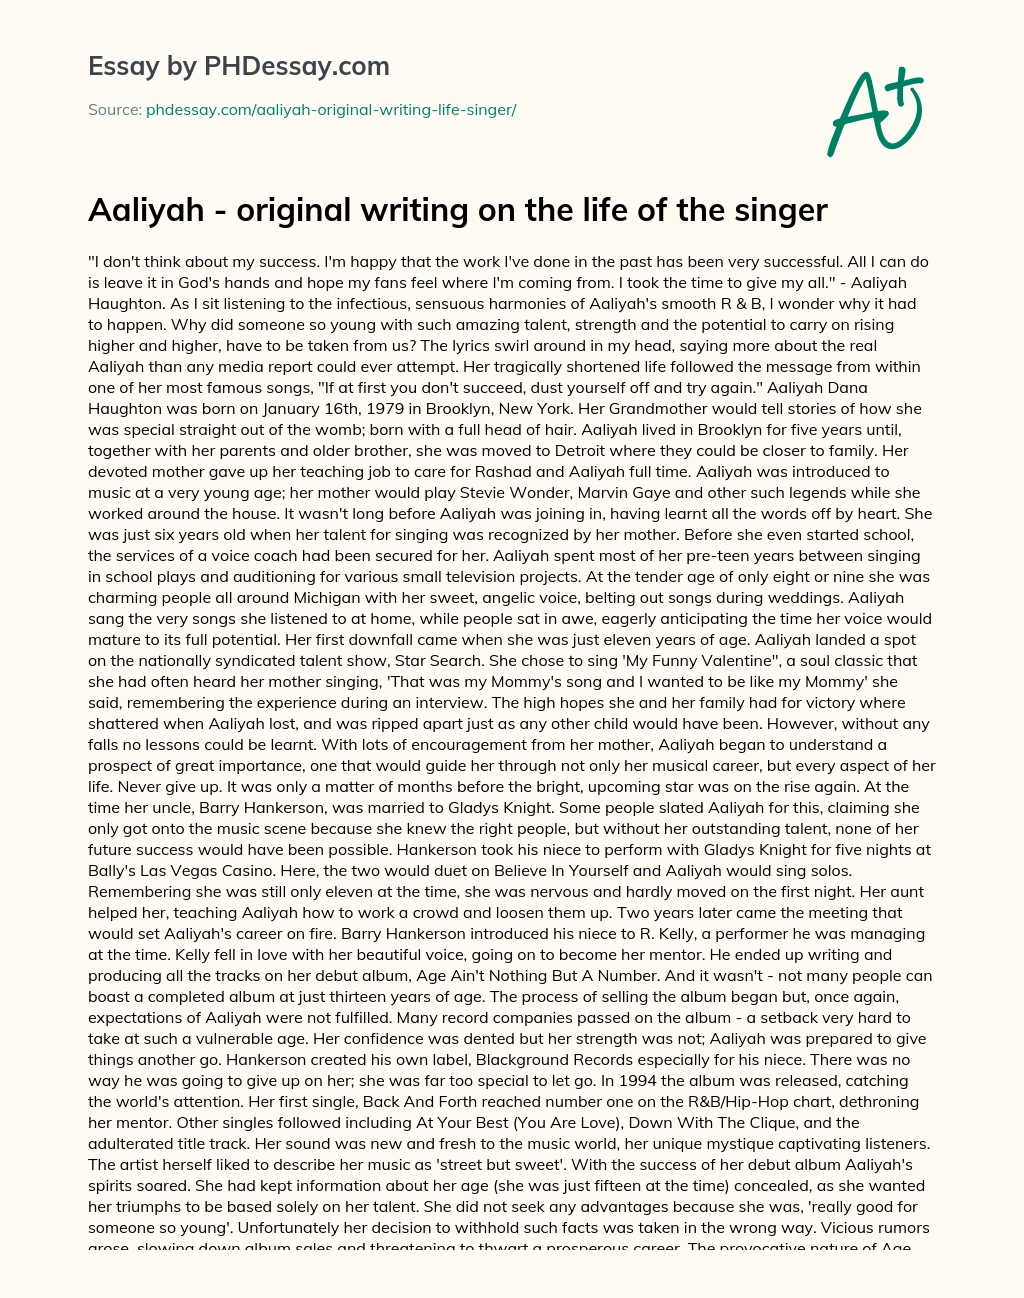 Aaliyah – original writing on the life of the singer essay